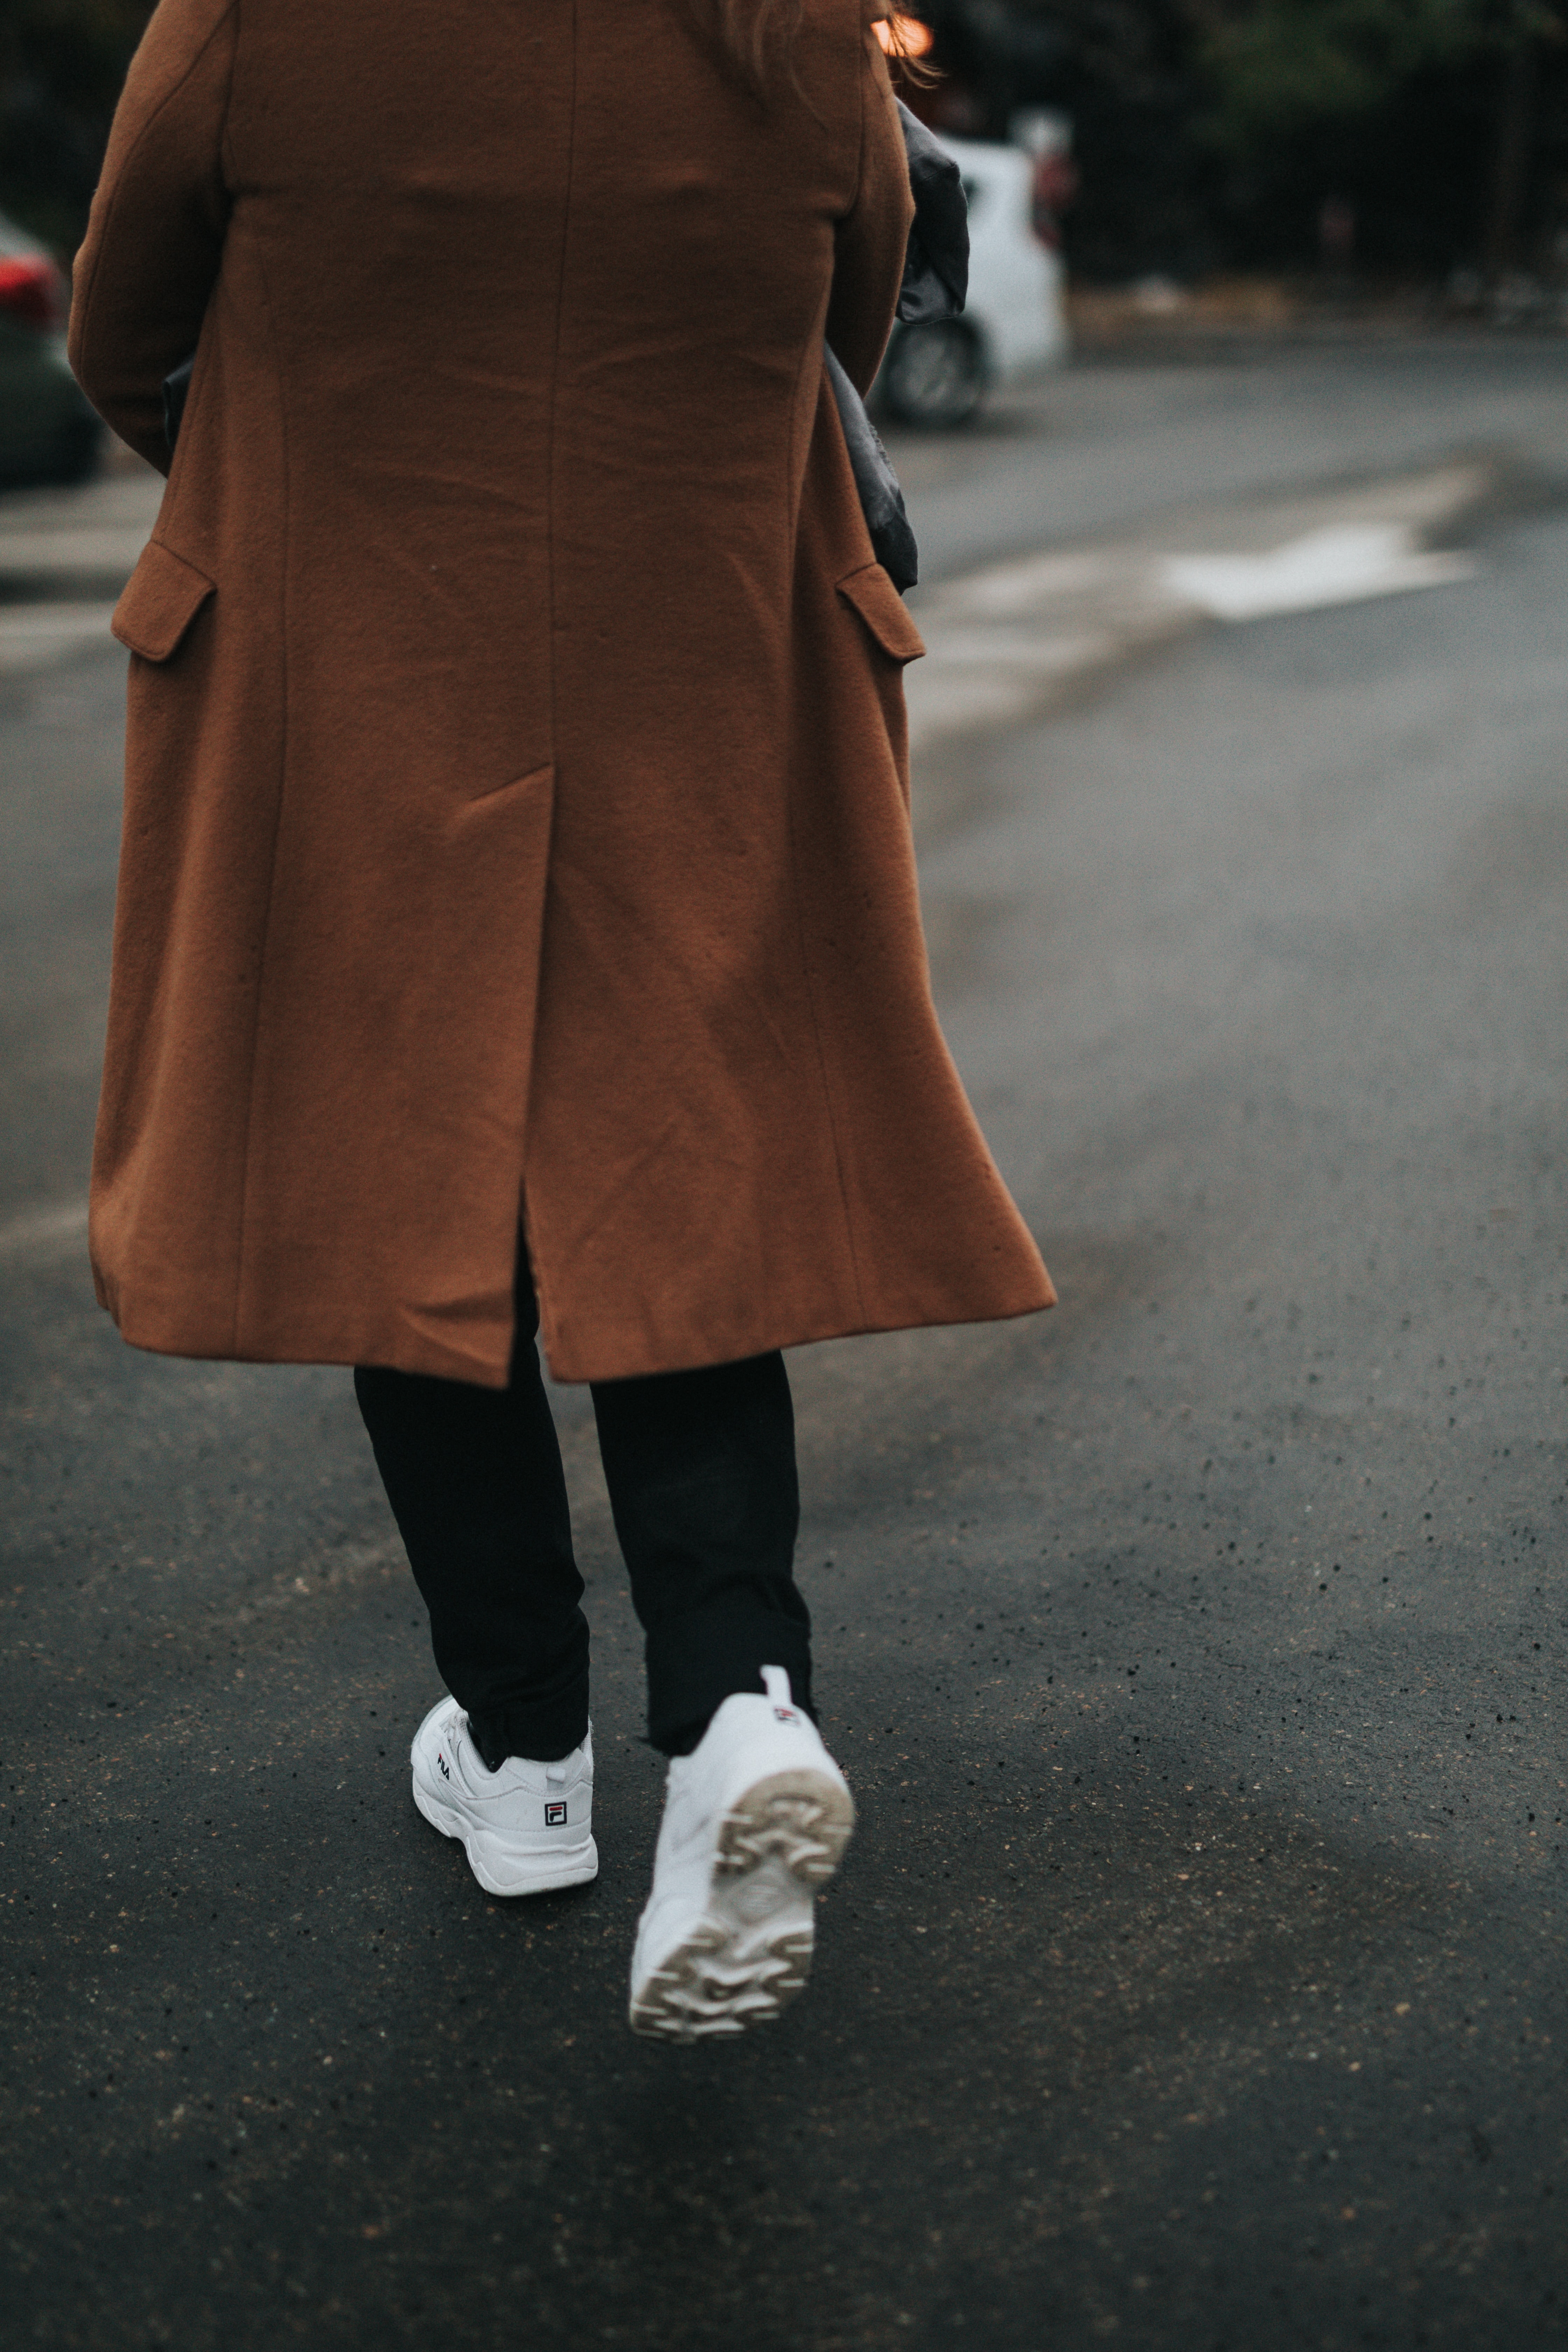 miscellanea, miscellaneous, sneakers, style, human, person, clothing, coat Aesthetic wallpaper